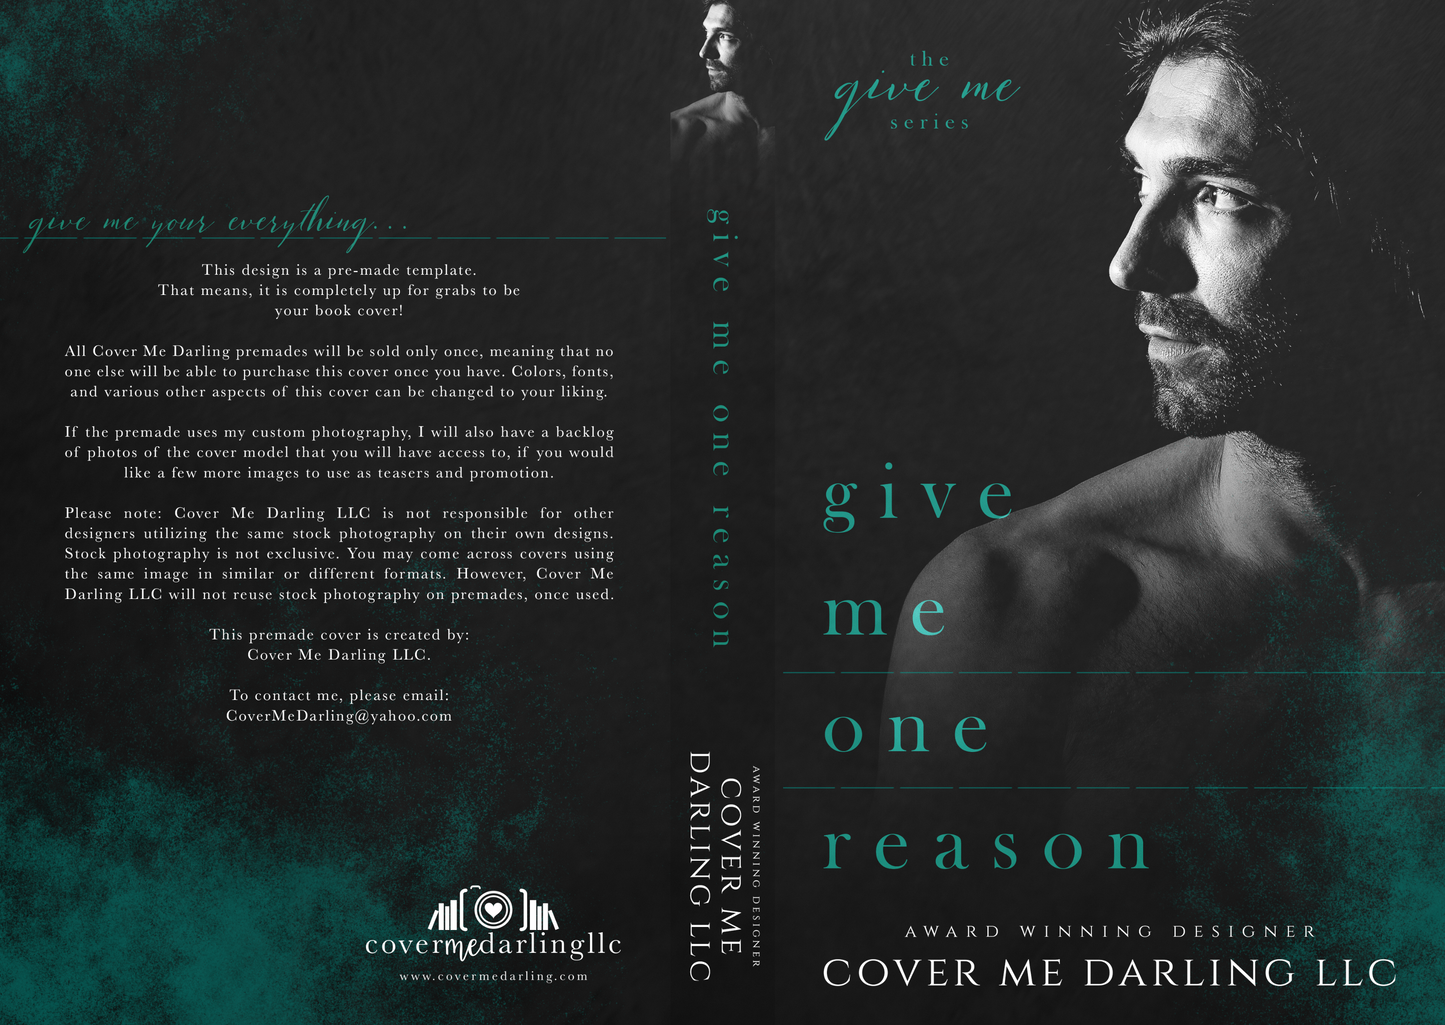 Premade : Give Me (SERIES)